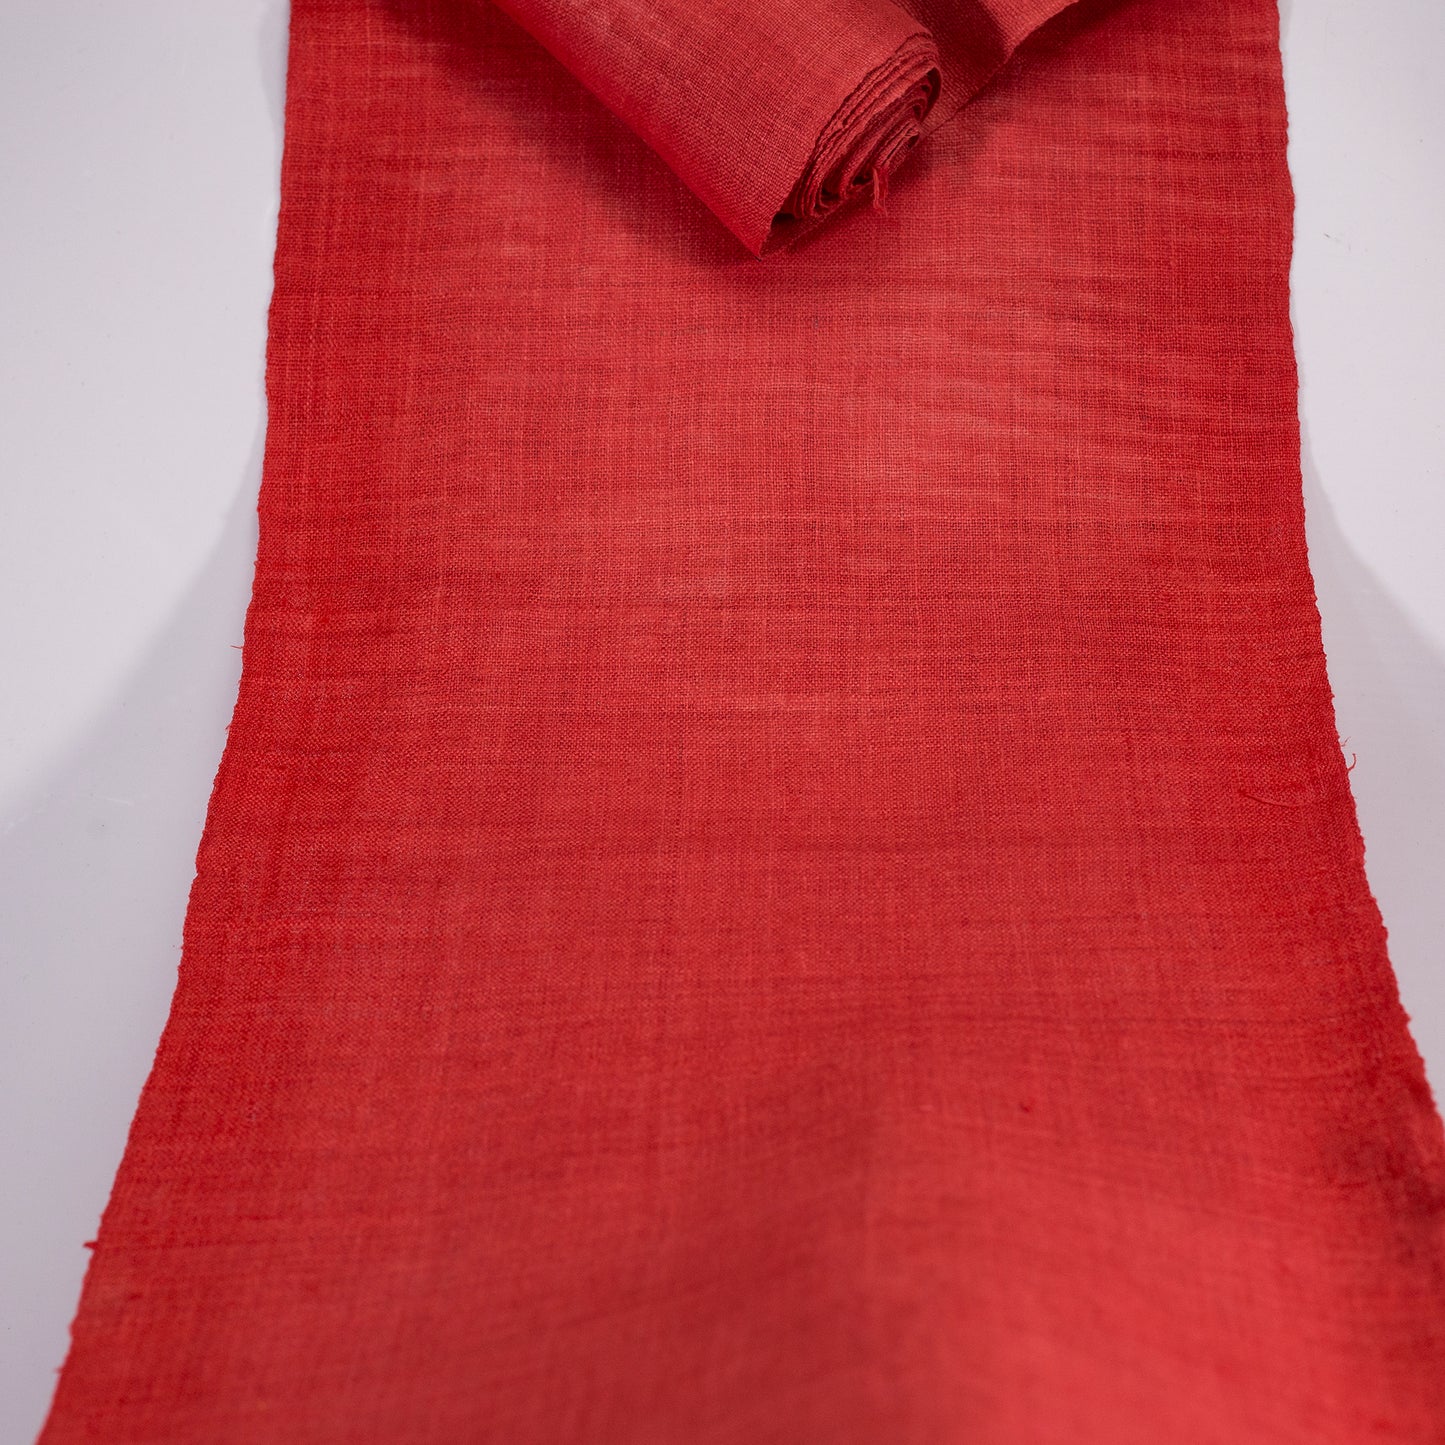 Raw hemp, natural color in RED